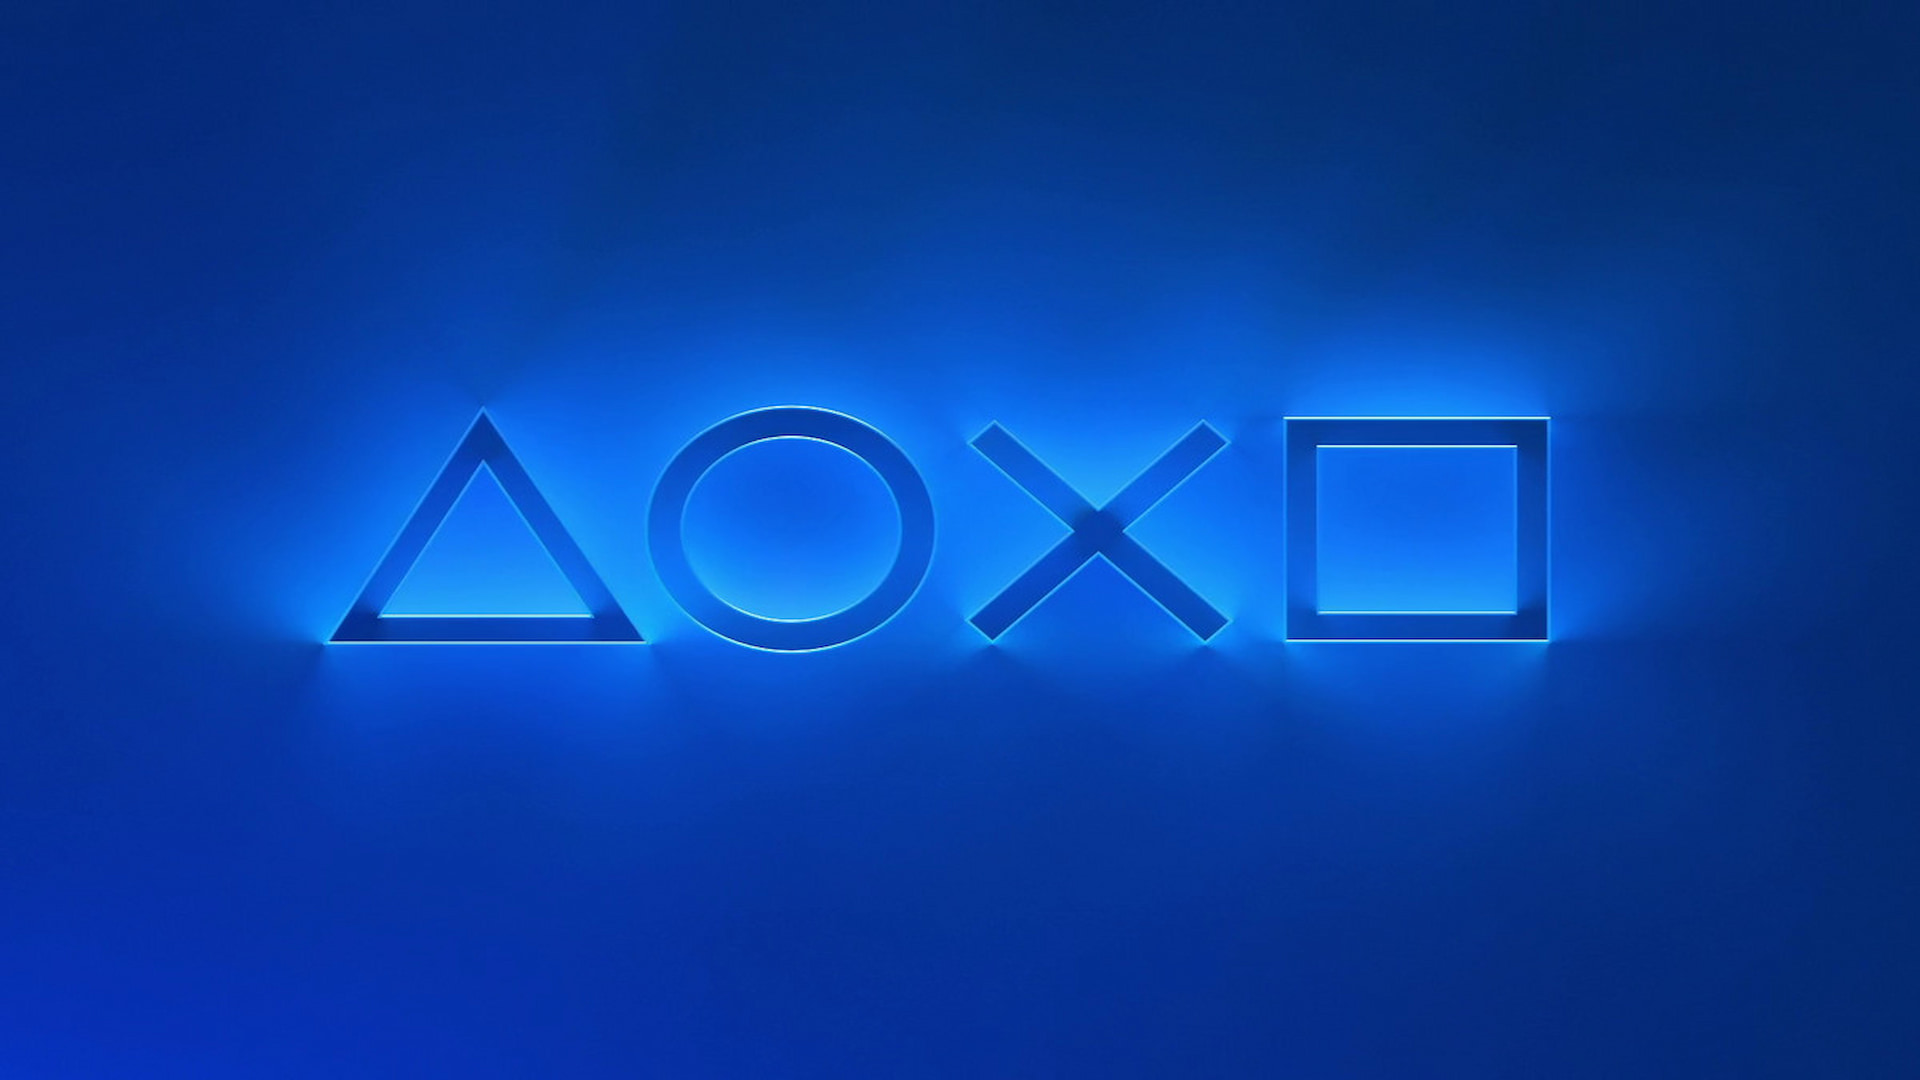 PlayStation Showcase to unveil Sony's future line-up next week